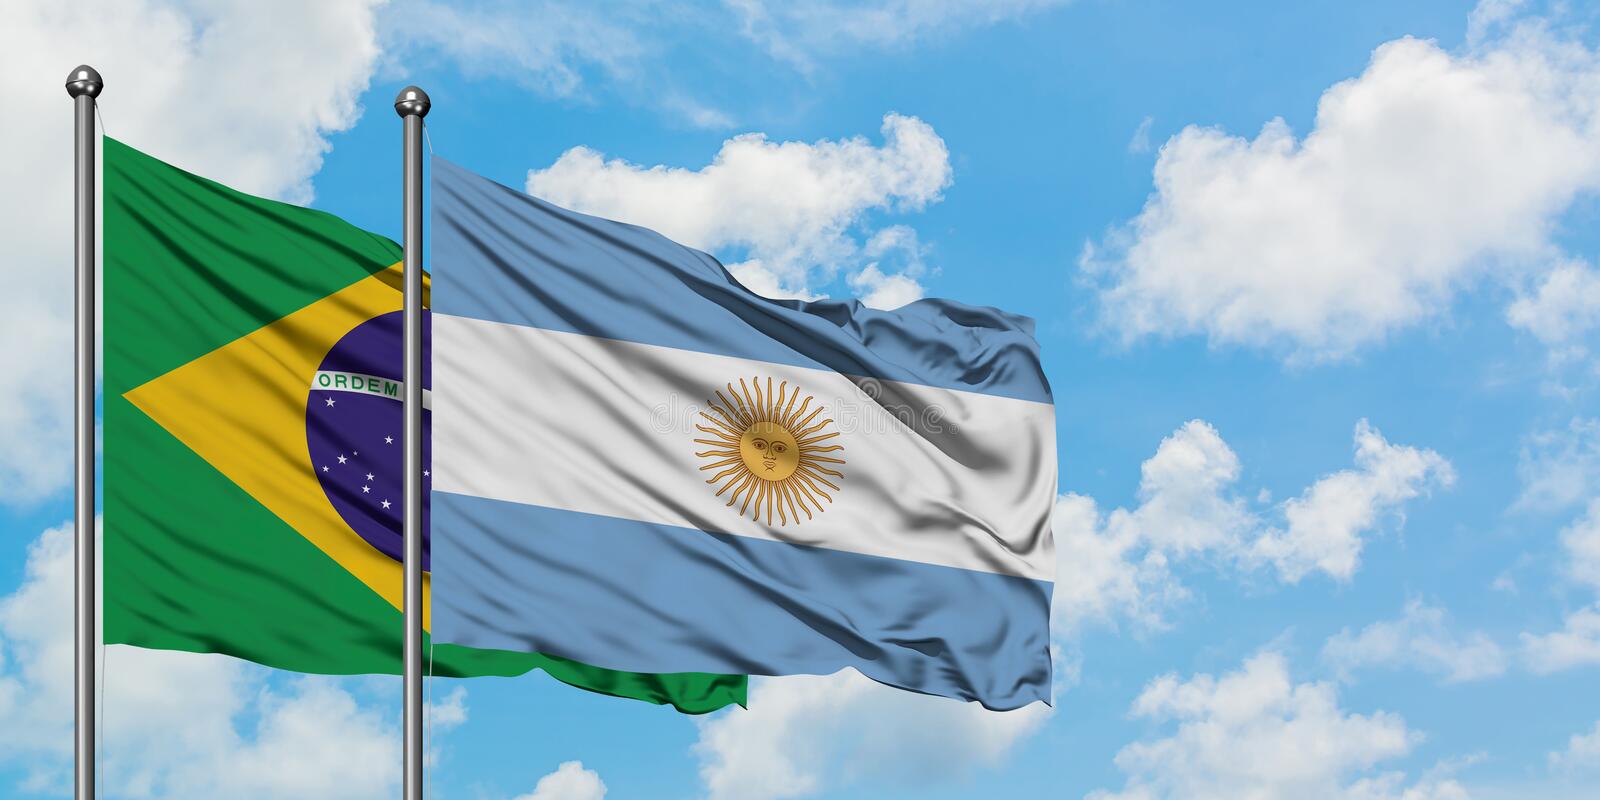 Argentine - Brazilian relationship will be decisive for the continent in the future. 